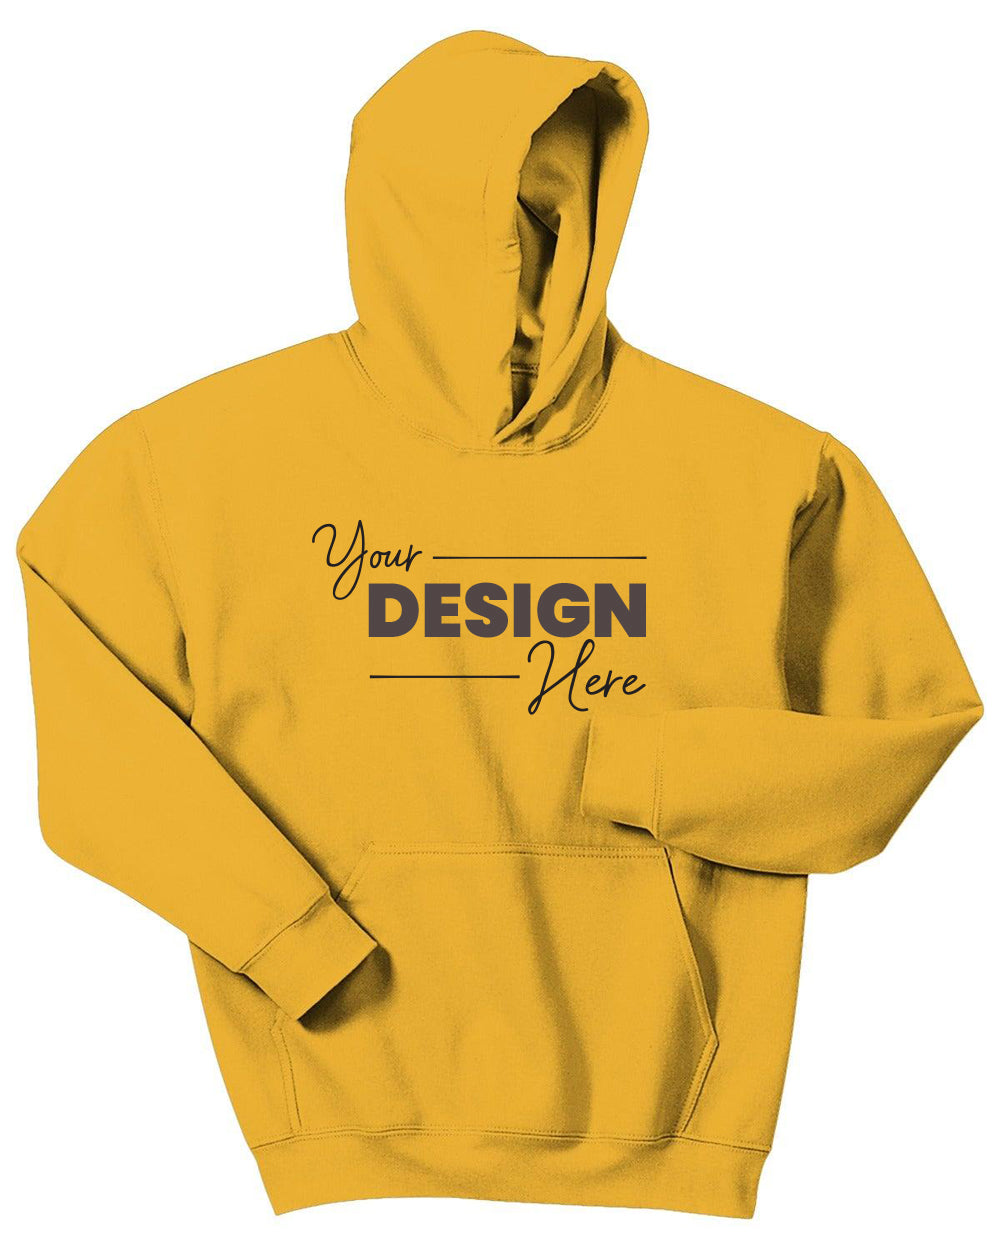 A durable and comfortable Gildan - Youth Heavy Blend Hoodie Sweatshirt 18500B, available in youth sizes, with your own design on it.